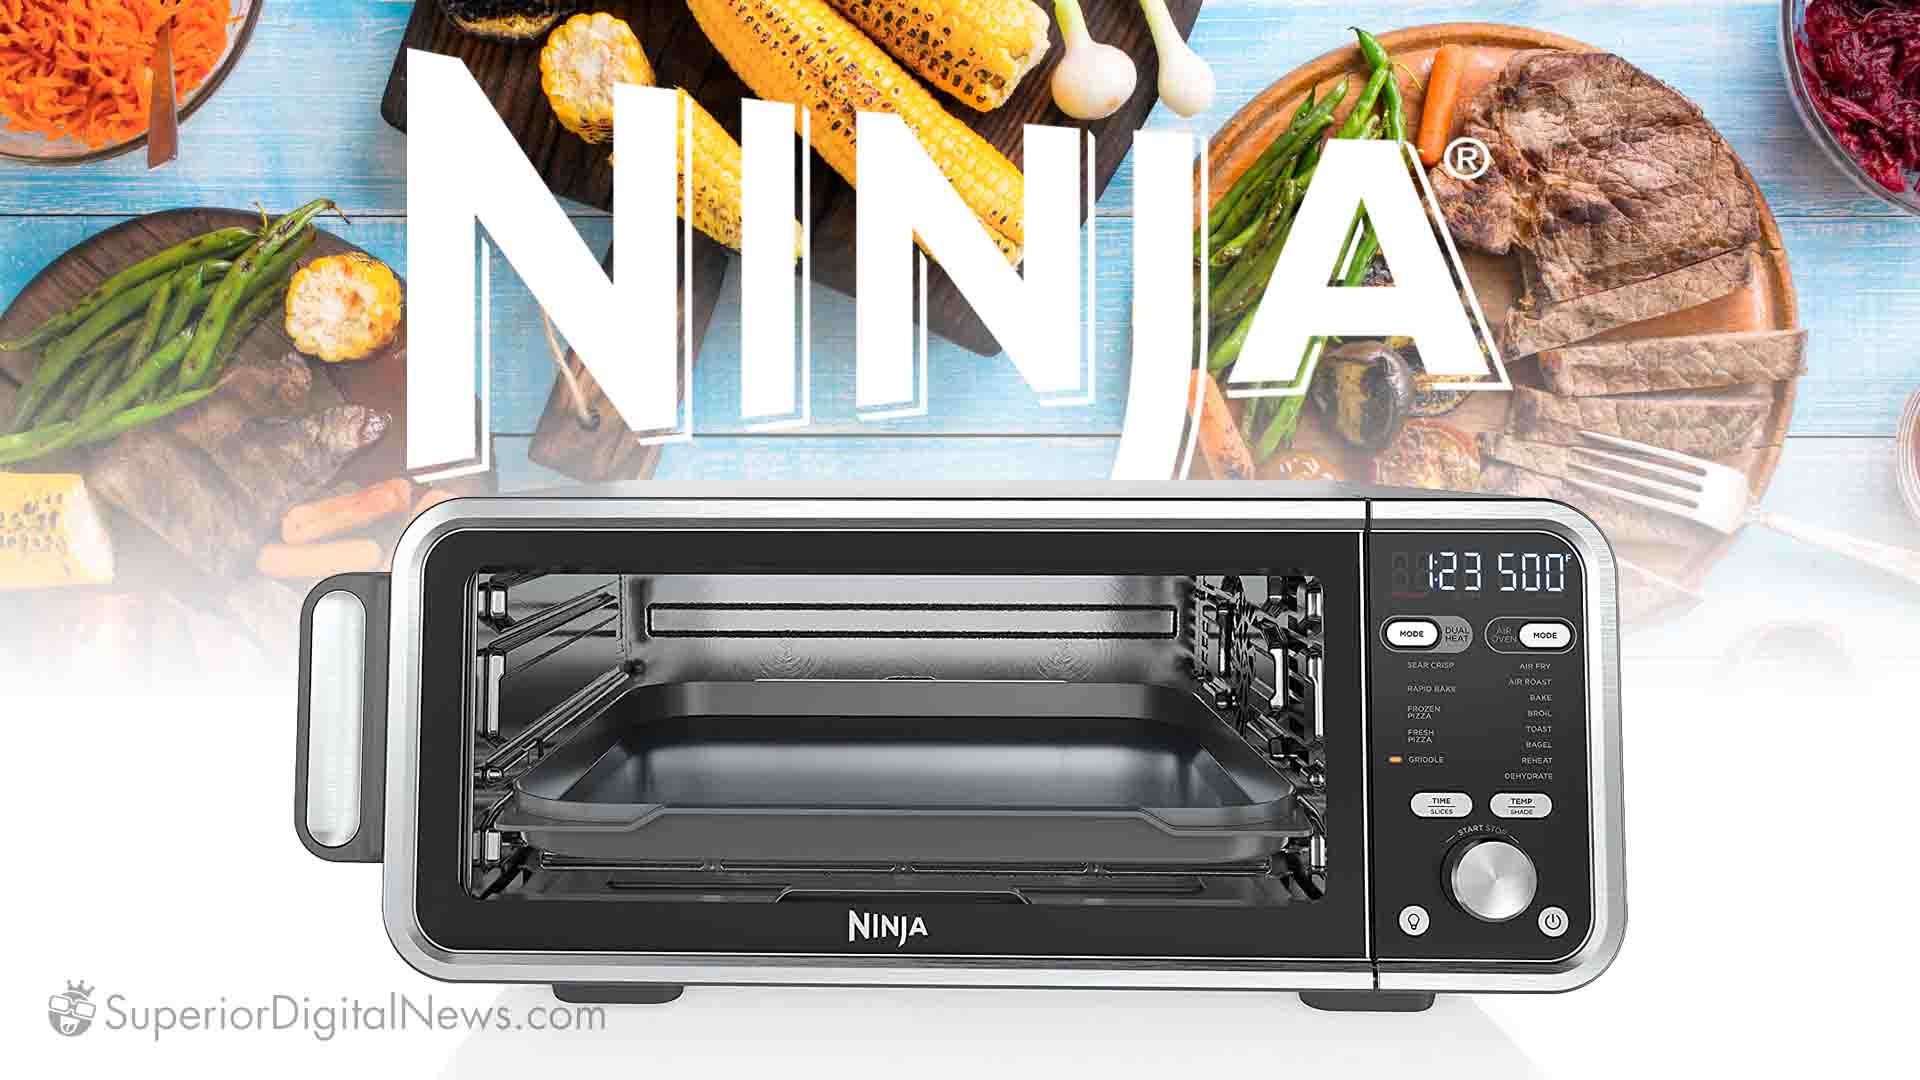 You are currently viewing Ninja SP301 Foodi 13-In-1 Dual Heat Air Fry Oven Review